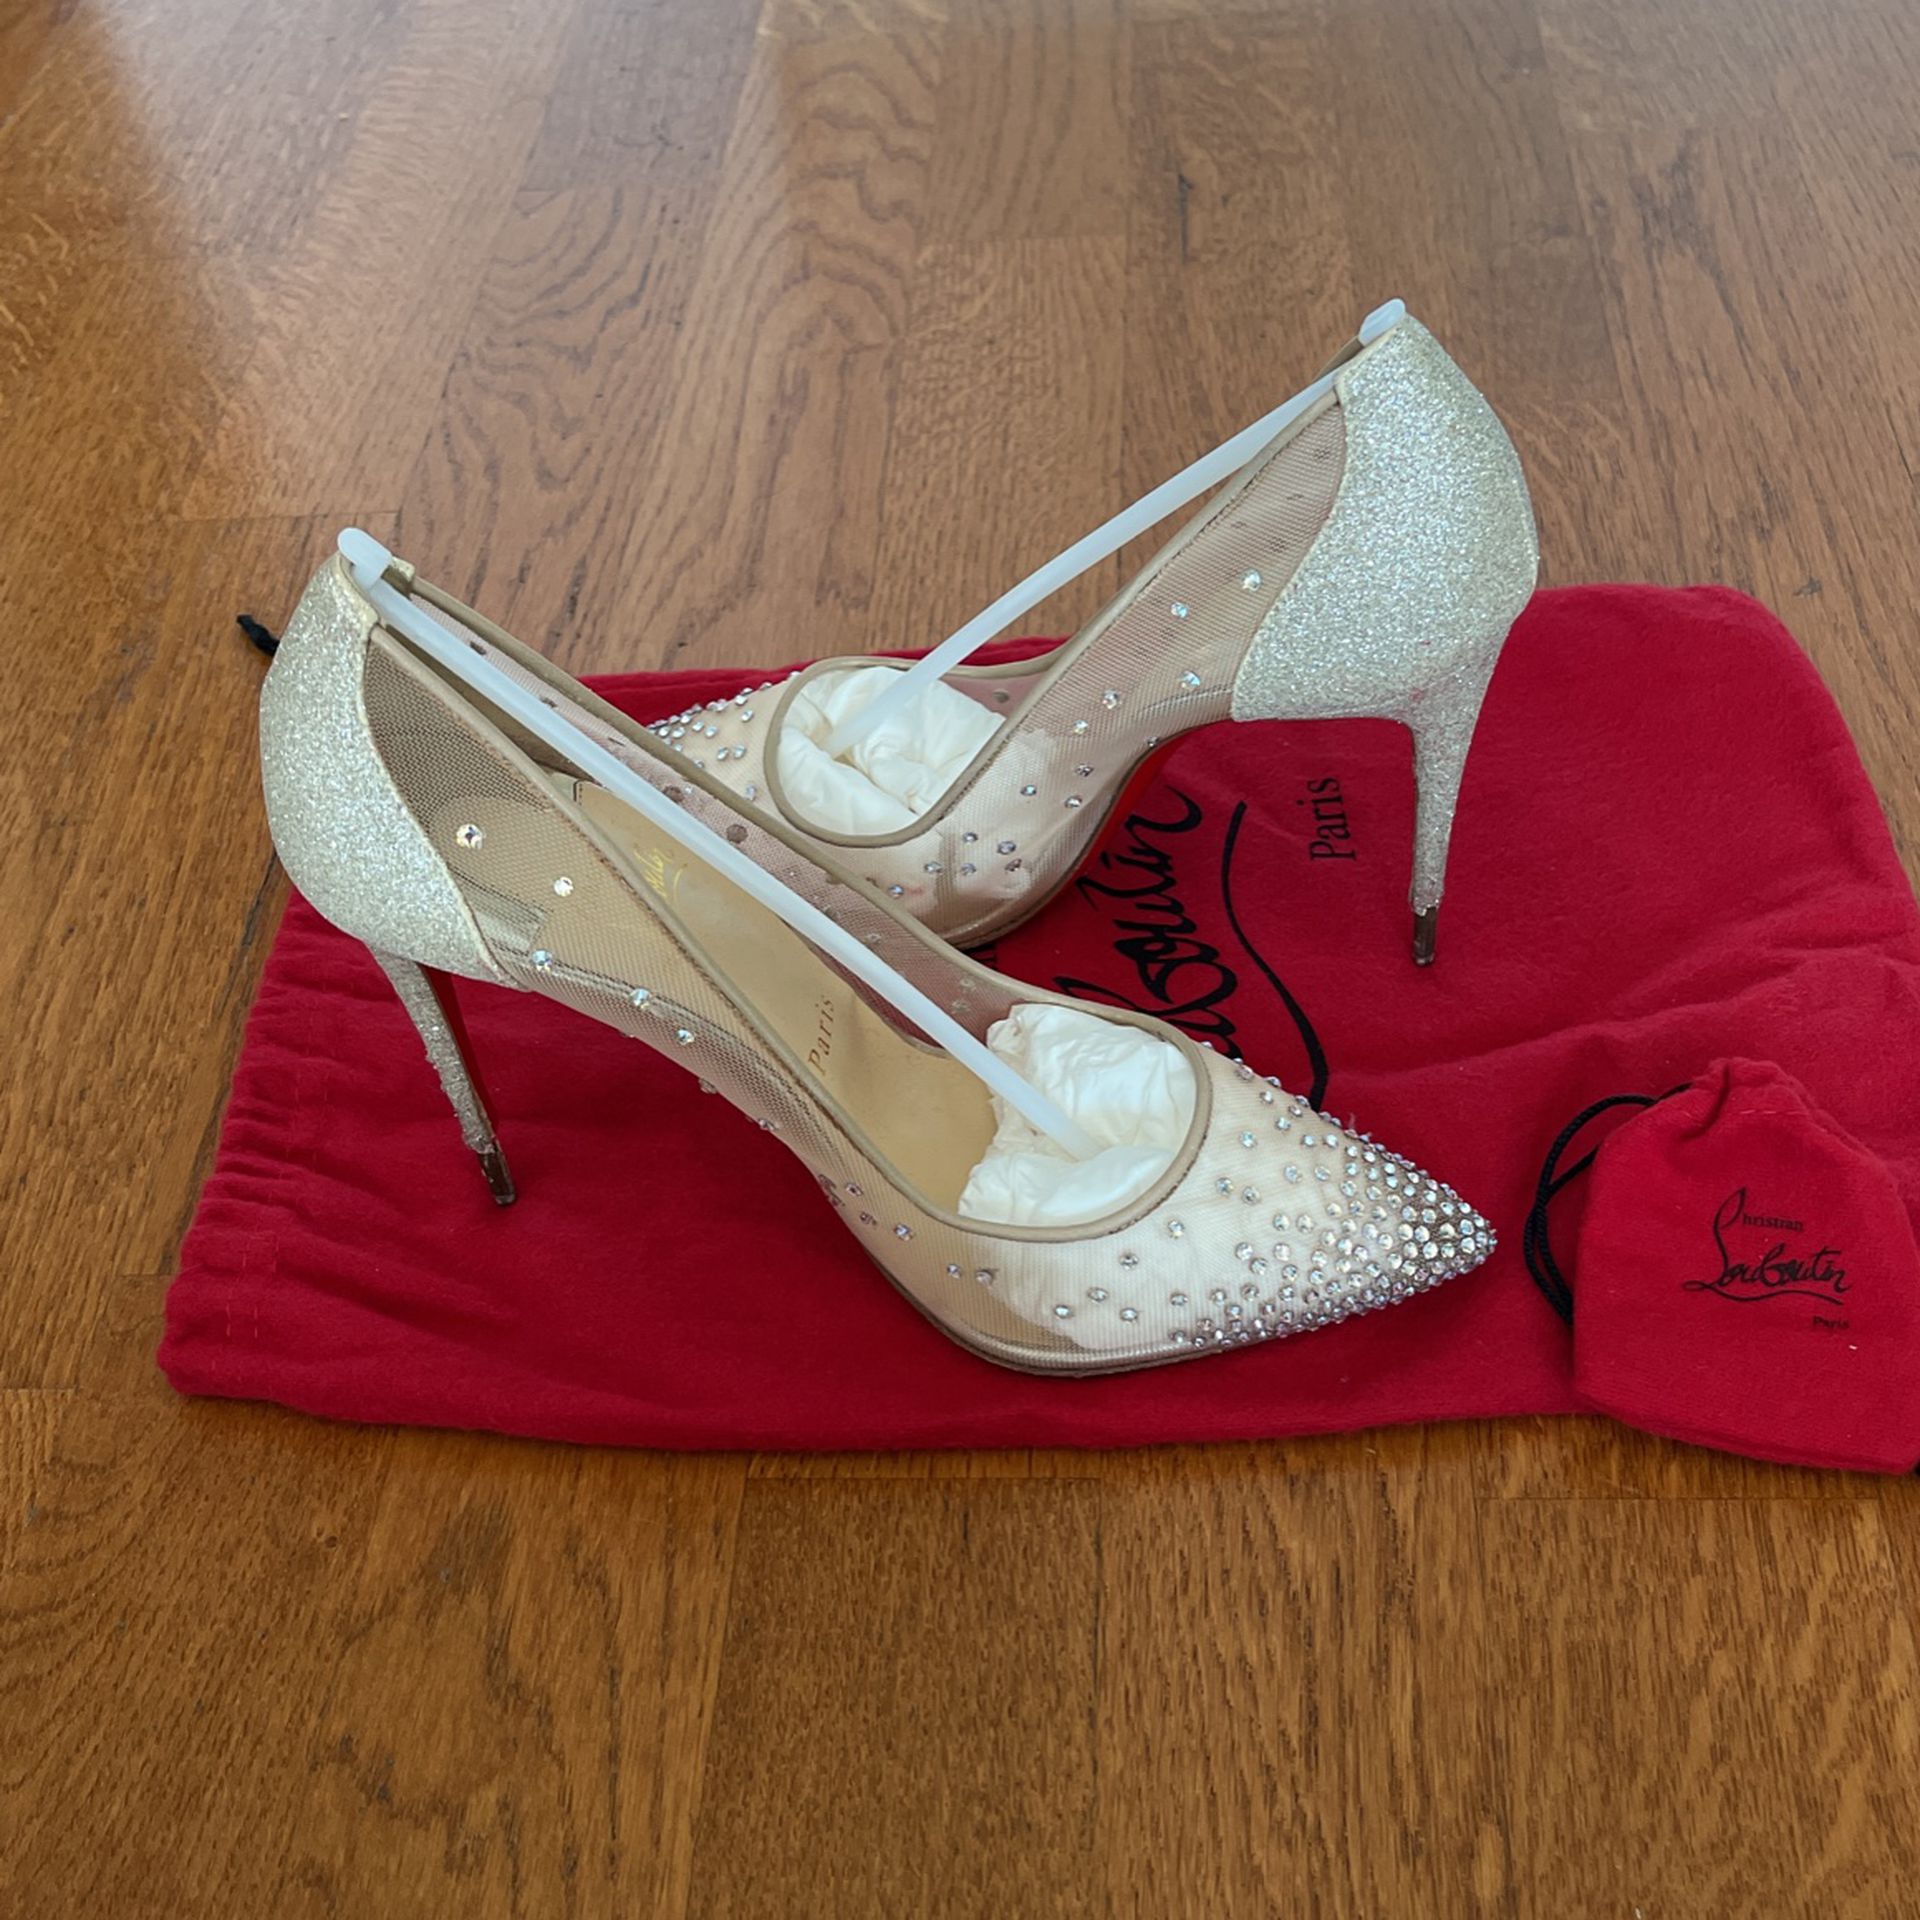 Louboutin Cinderella Shoes Sale in Chicago, IL - OfferUp